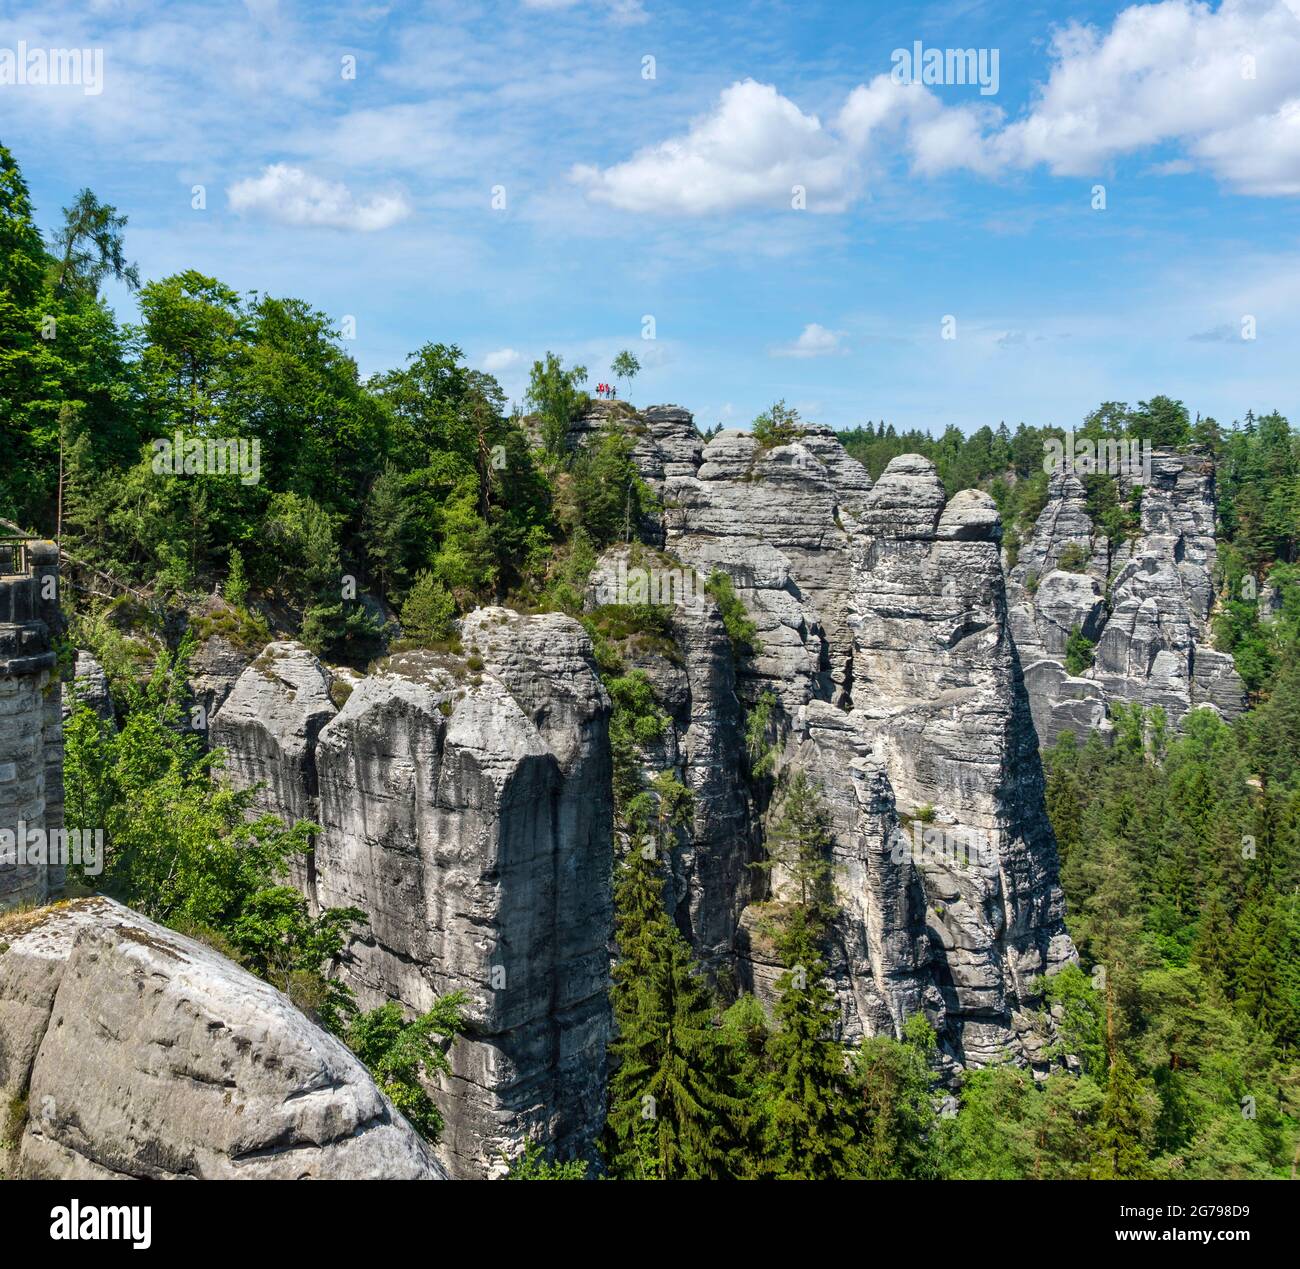 The Bastei is a rock formation with a viewing platform in Saxon Switzerland on the right bank of the Elbe in the area of the municipality of Lohmen. It is one of the most popular tourist attractions in Saxon Switzerland. Stock Photo